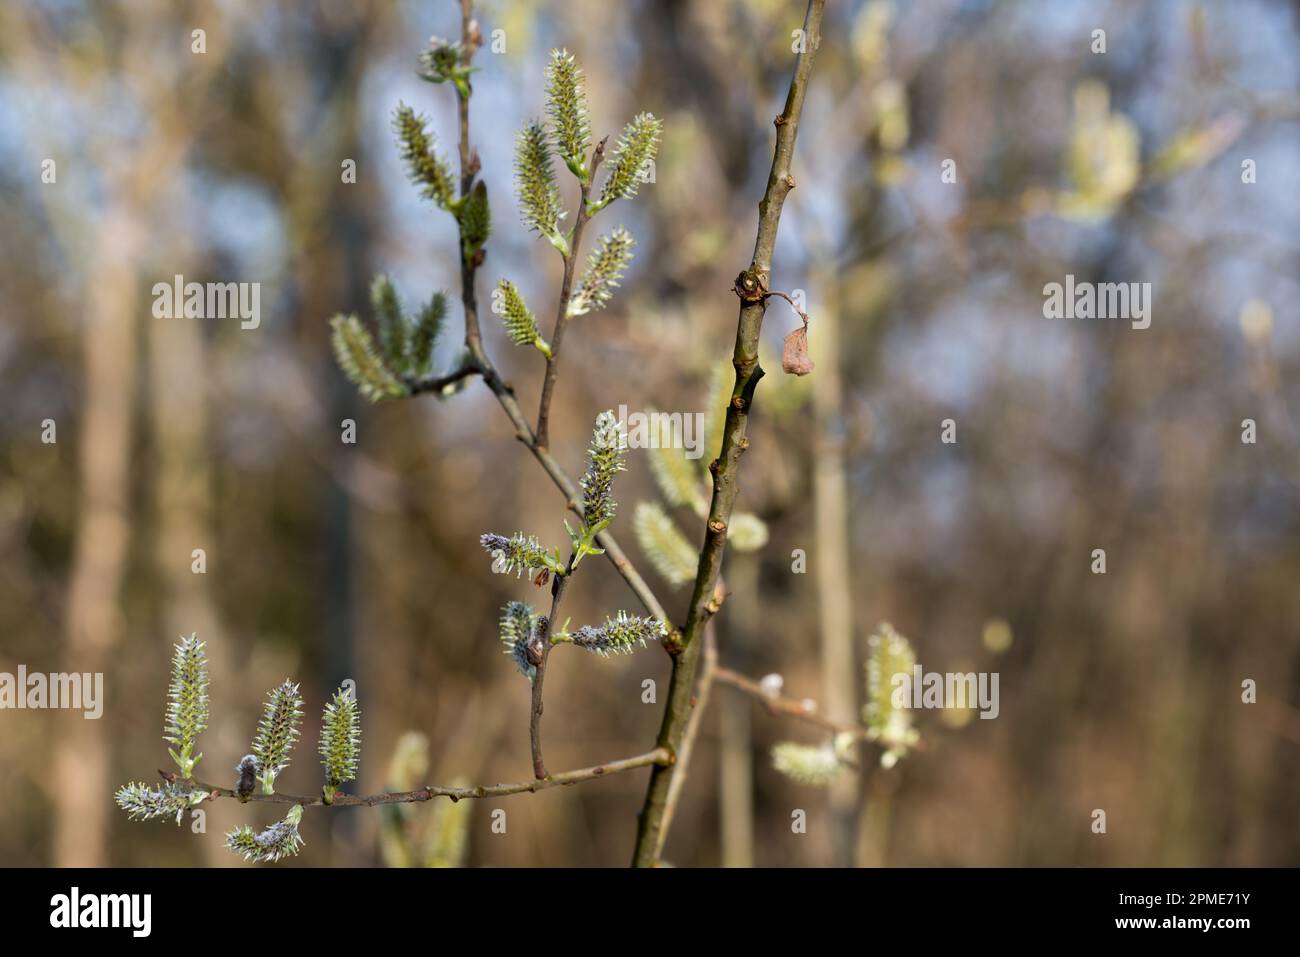 Willow green female catkins on twig closeup selective focus Stock Photo